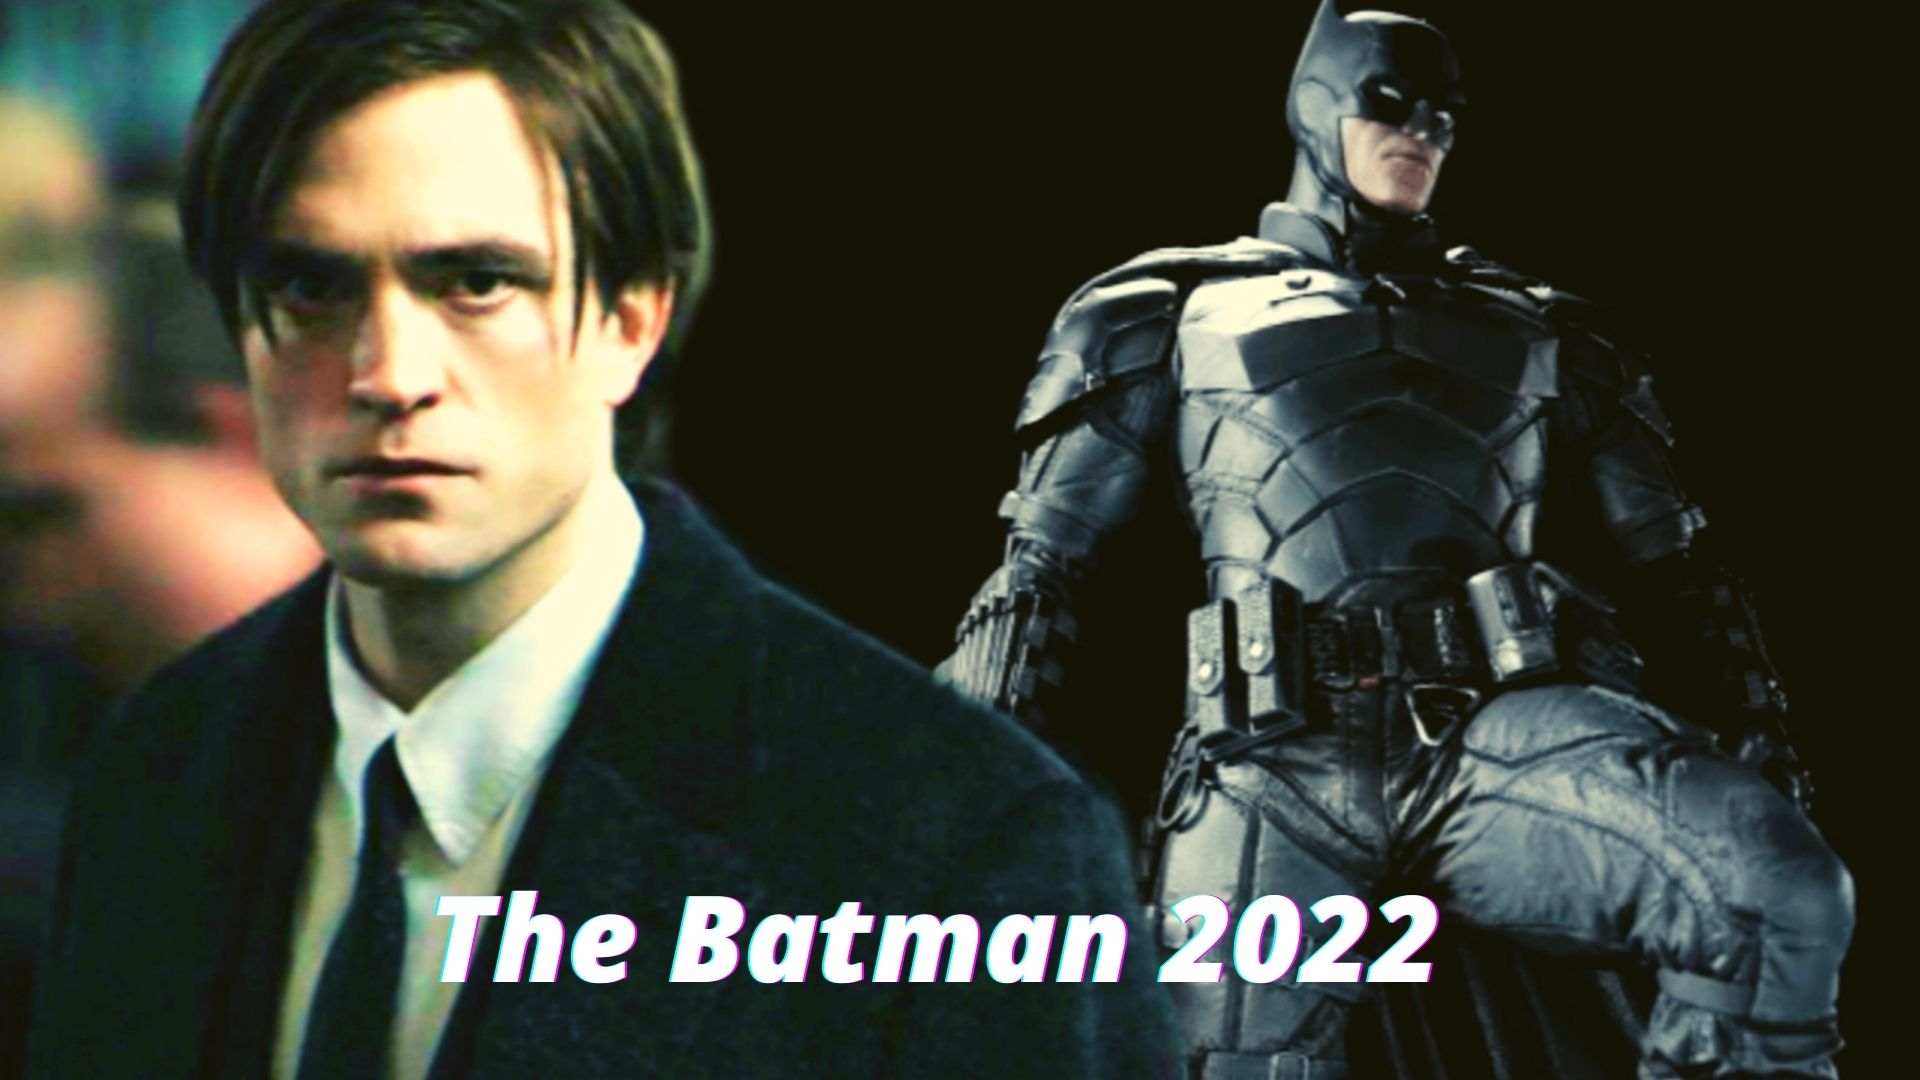 The Batman 2022 Release date, cast of the movie, writer and director